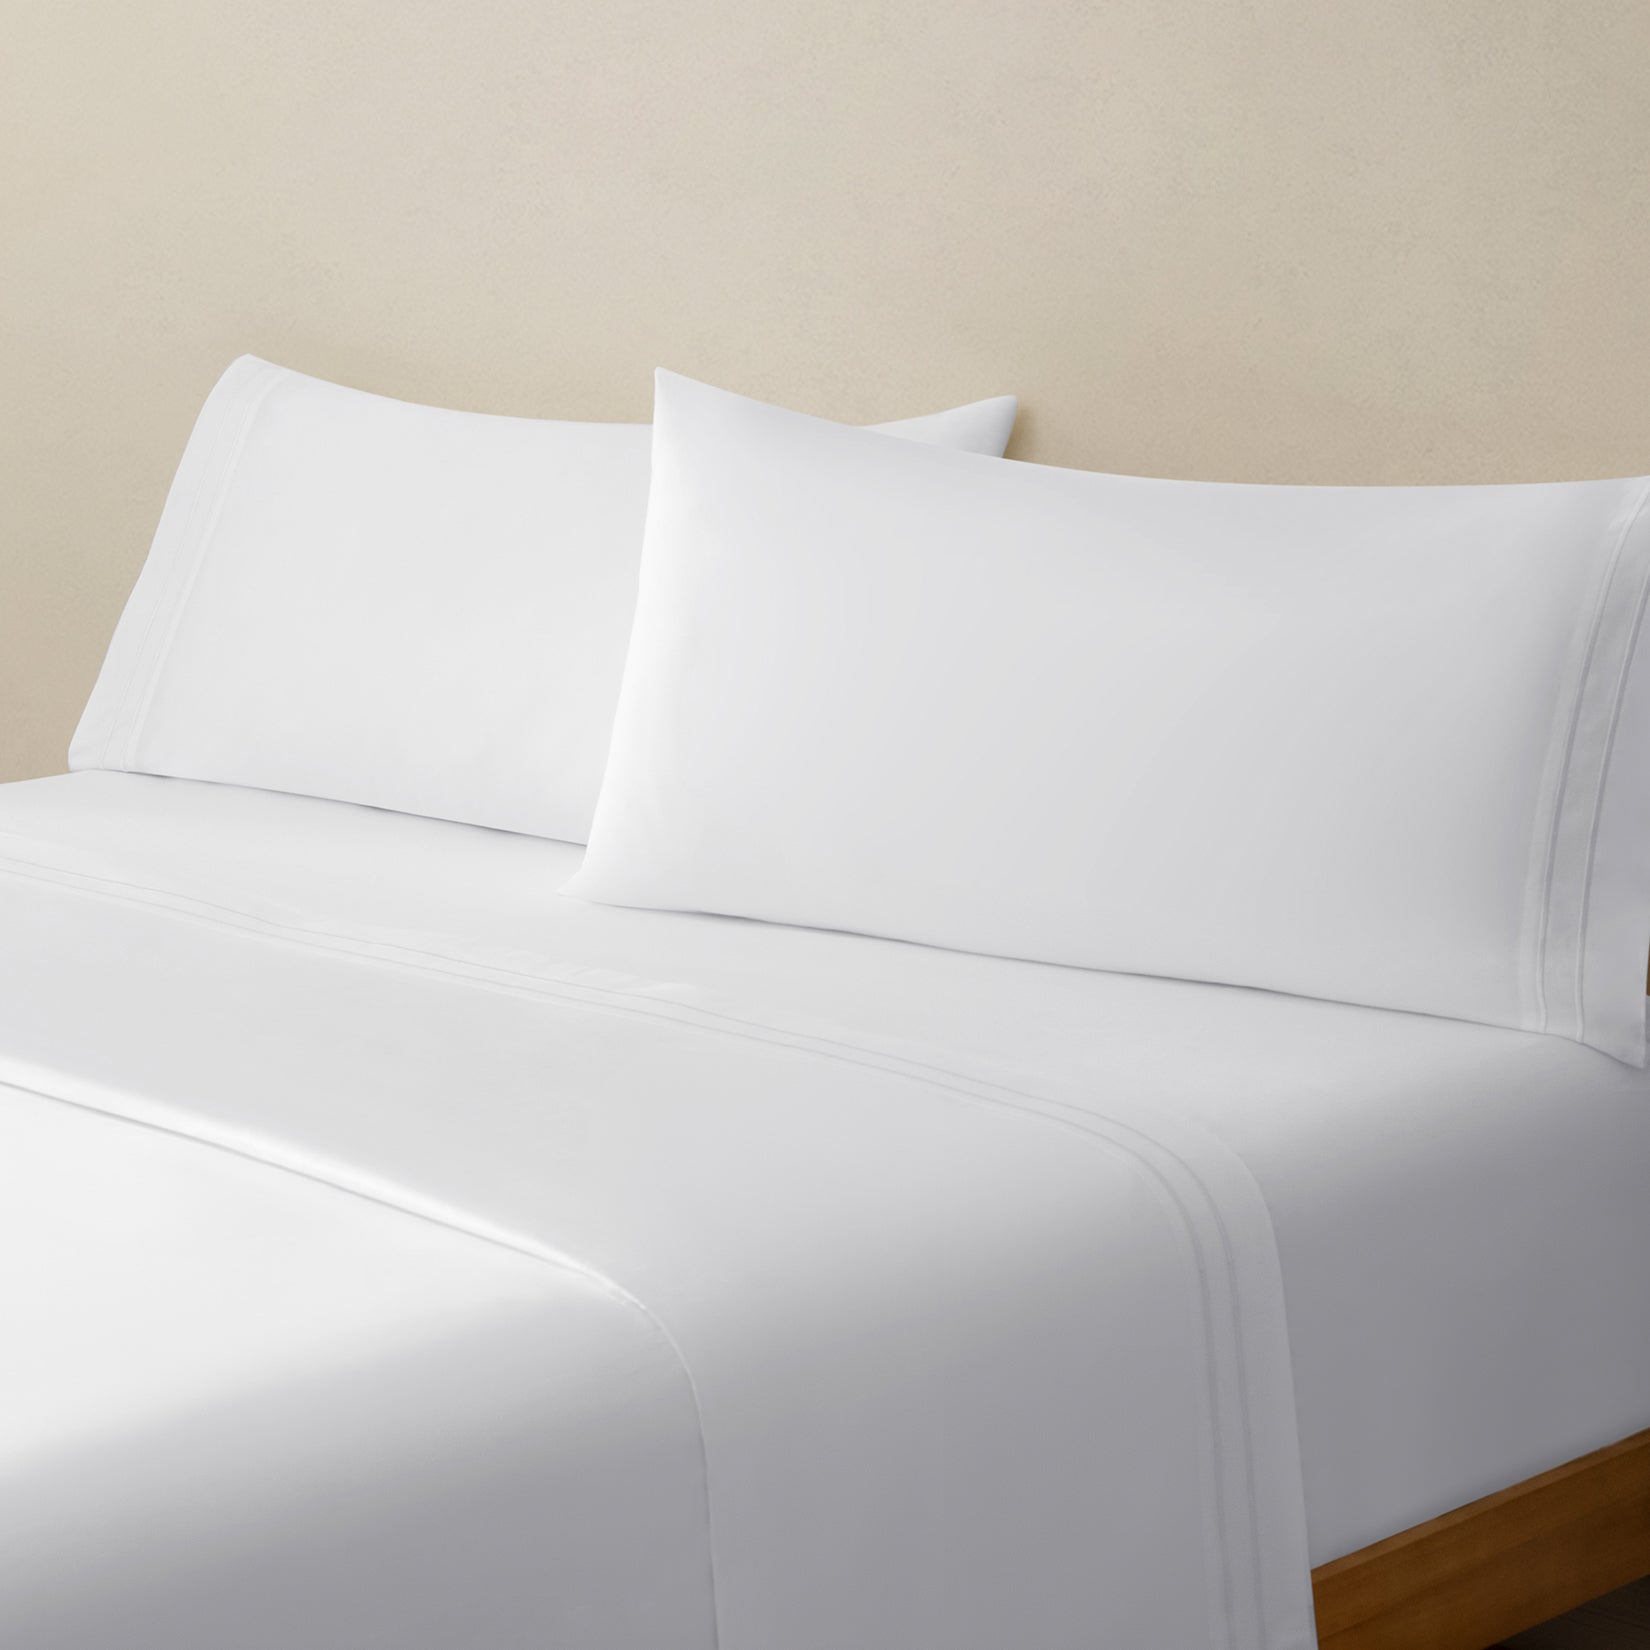 Sofia Classic White Double Satin Stitched Cuff 300 thread count cotton bed sheet set. White pillows and white cotton sheets on bed from side angle.